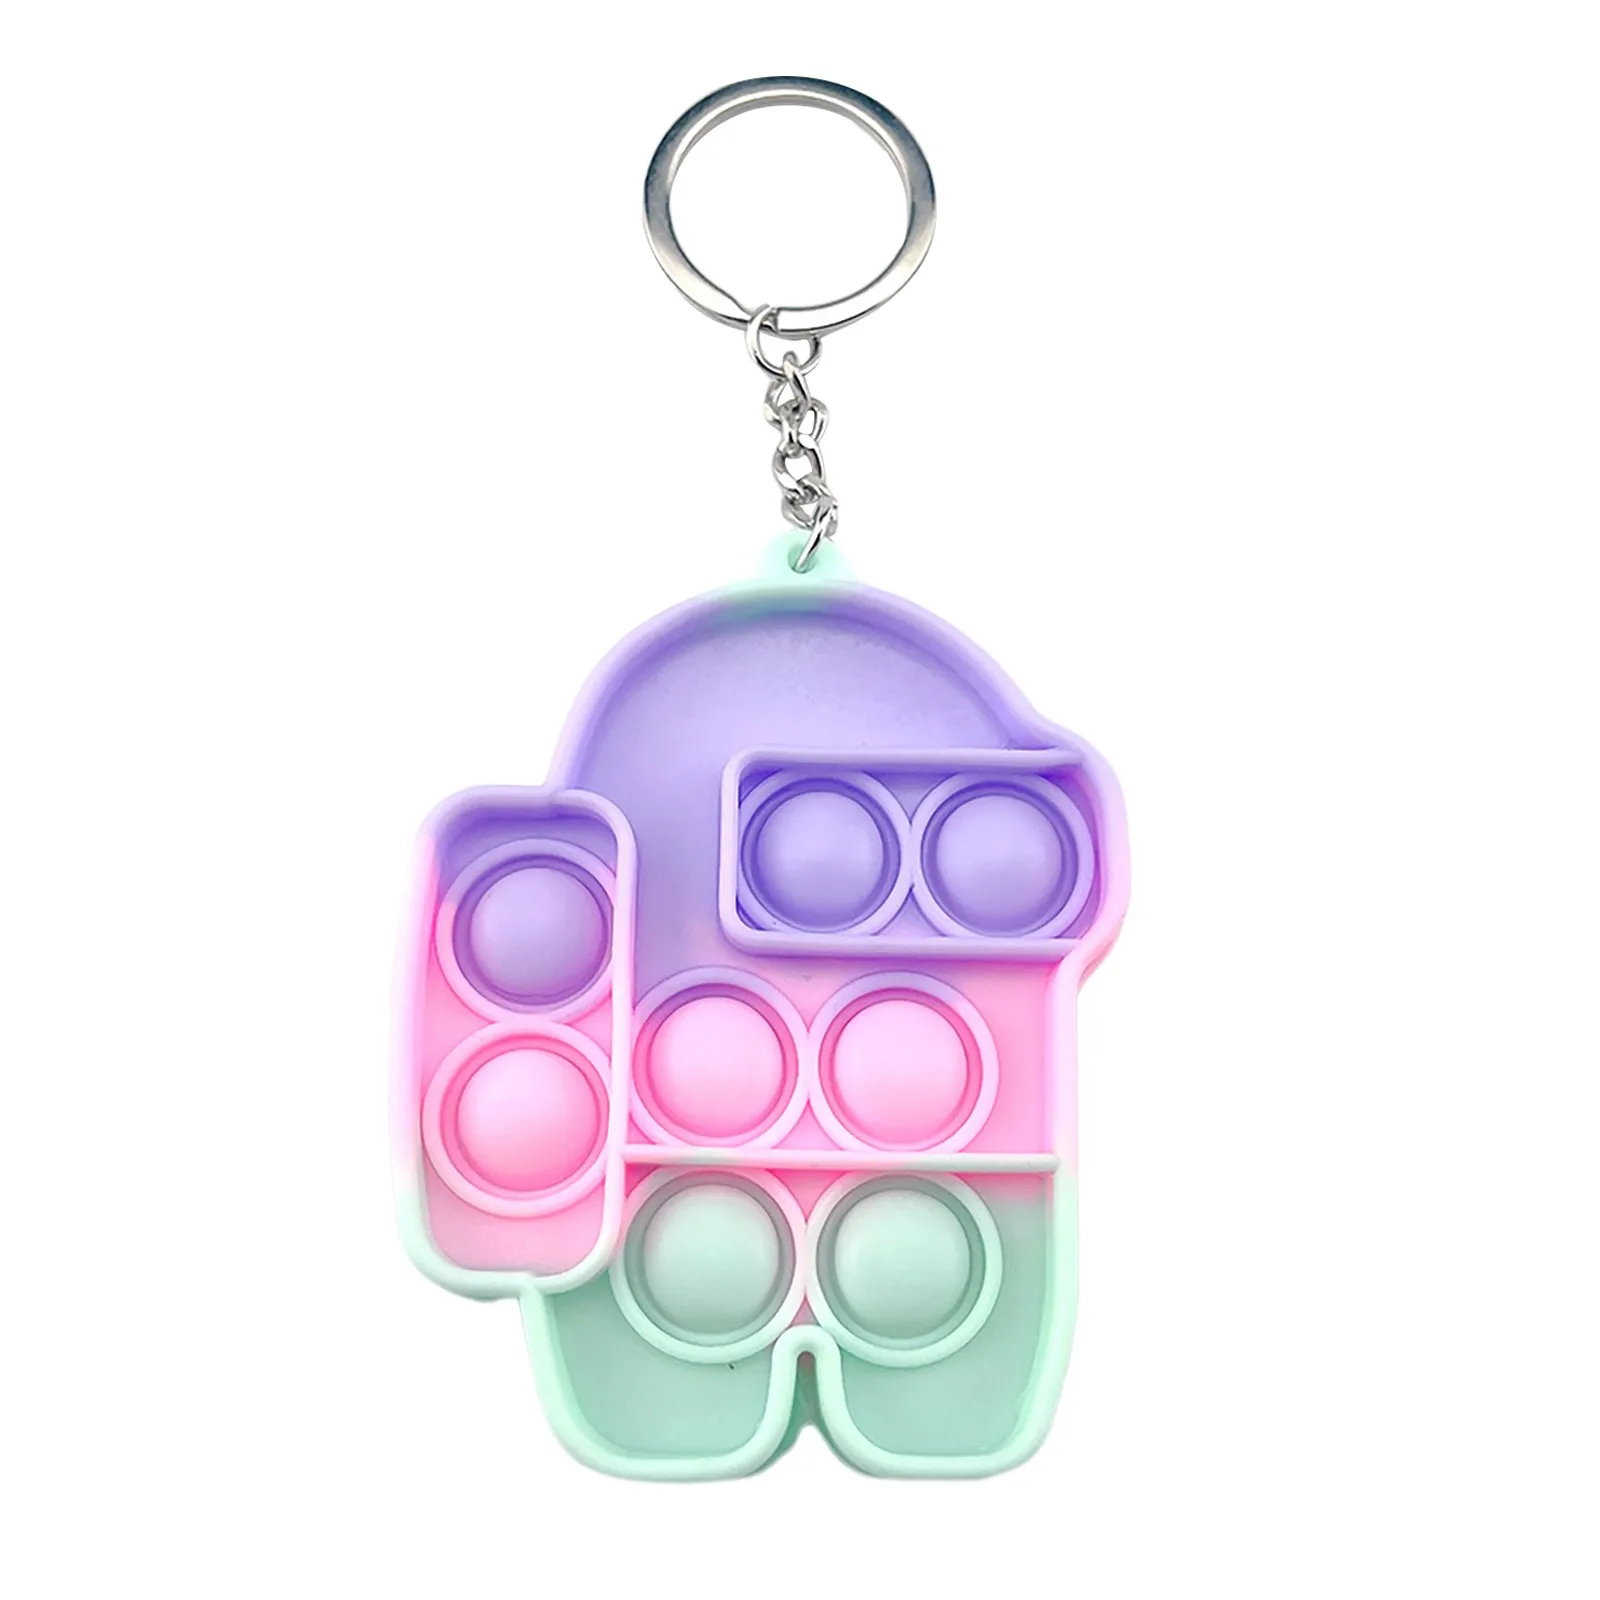 Mini Pops Simple Dimple Keychain Its Push Bubble Anxiety Sensory Fidget Toy Anti Stress Relief For Autism Adults Key Chain Toys nedo stress ball